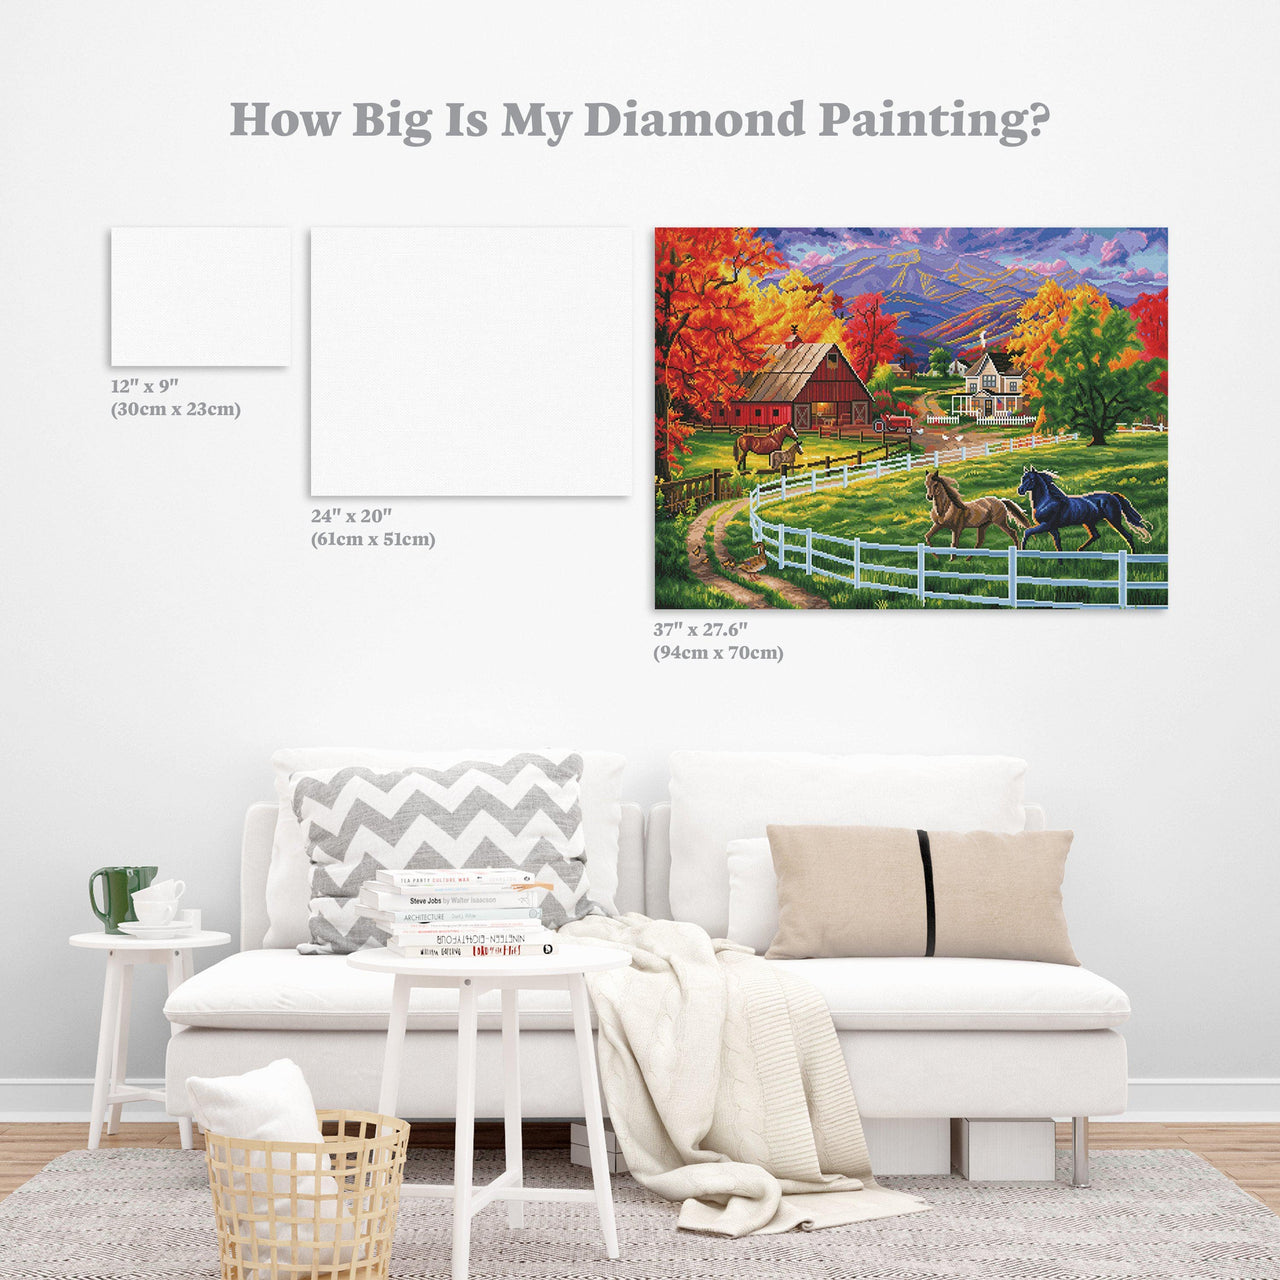 Diamond Painting Horse Valley Farm 37.0" x 27.6″ (94cm x 70cm) / Square with 58 Colors including 2 ABs / 103,321